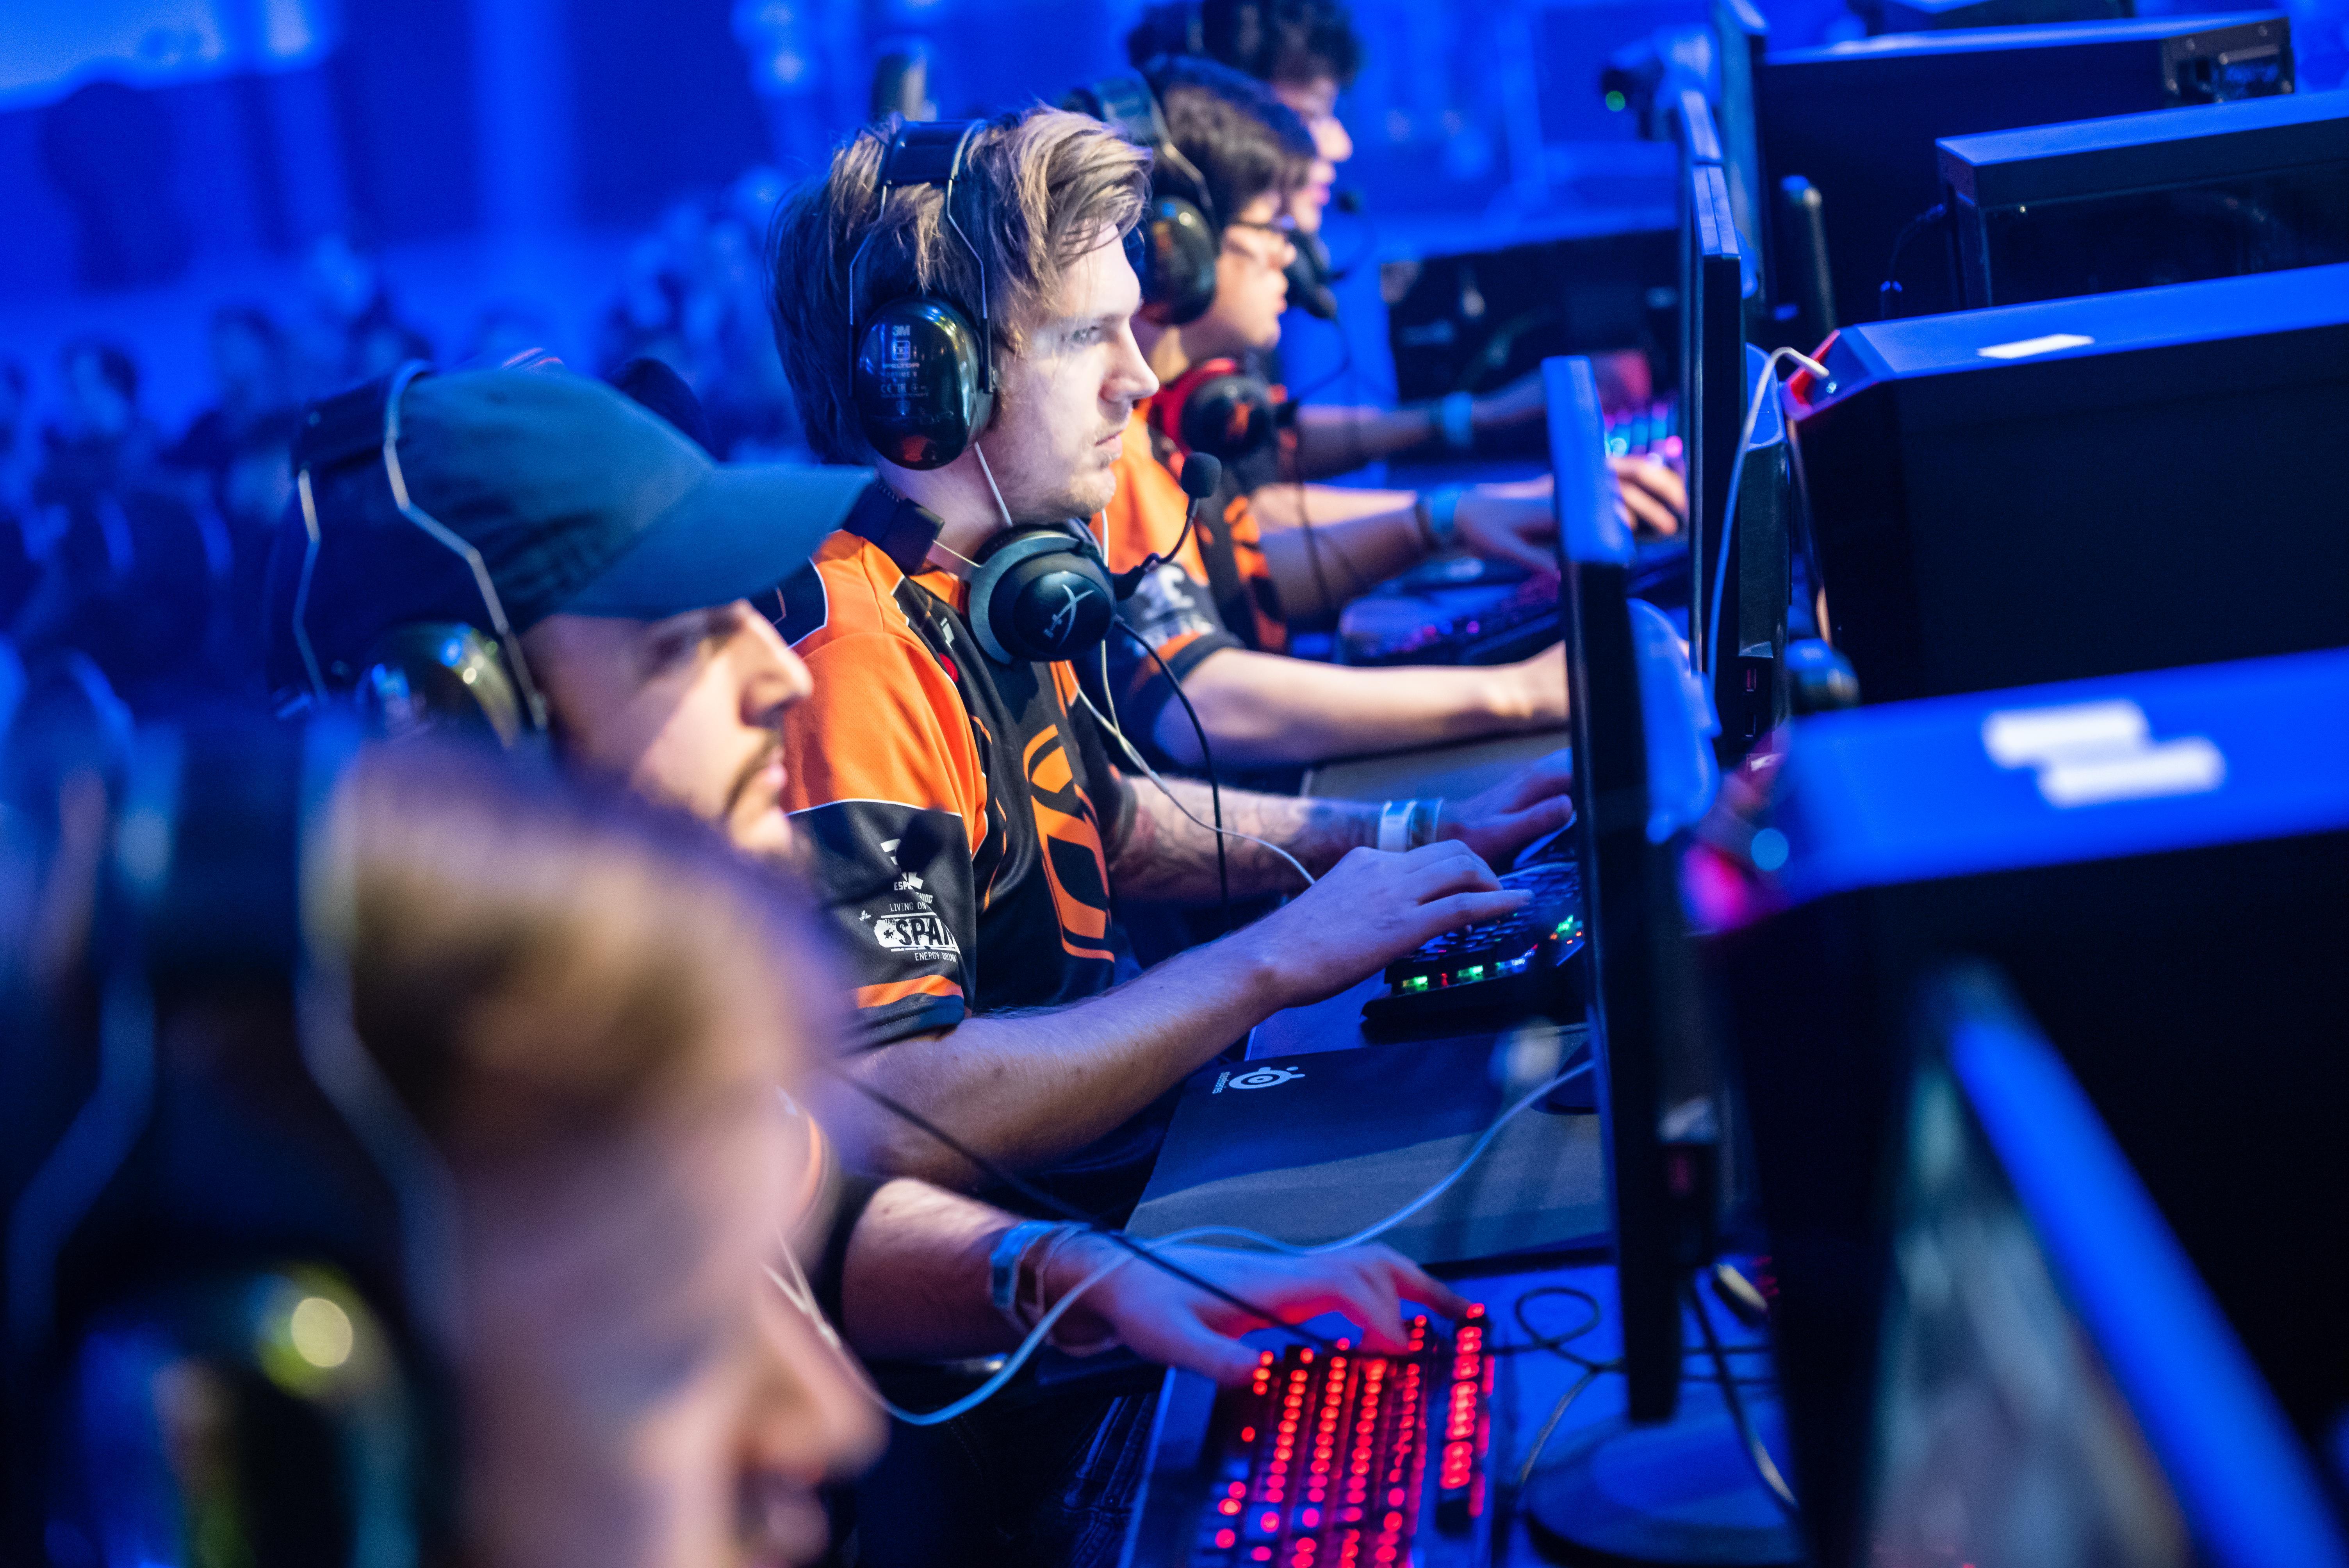 Esports is booming in Brabant